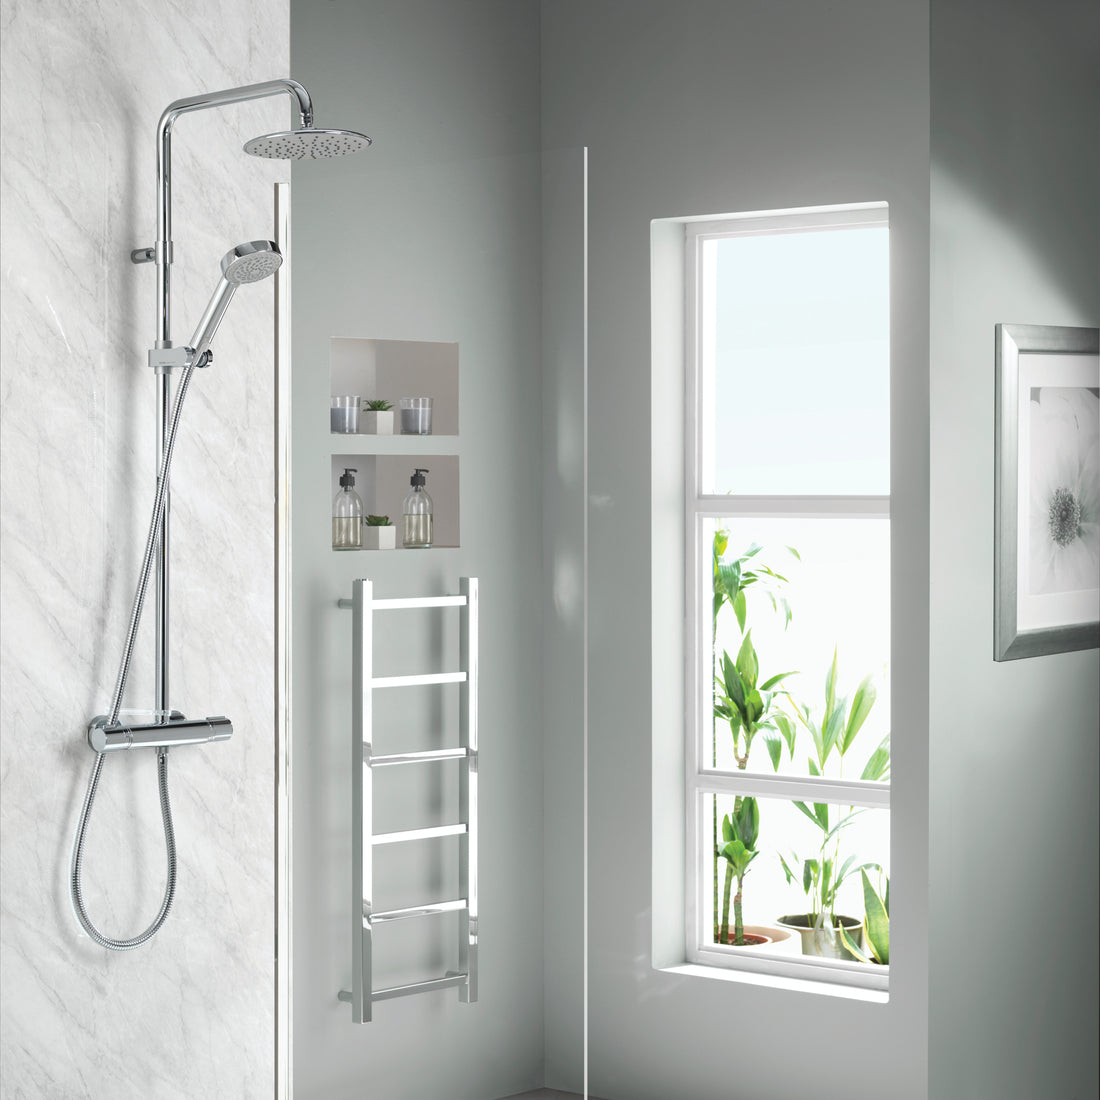 Aqualisa Midas 110 Shower Column - Exposed With Adjustable And Fixed Head against wall panel in white MD110SC